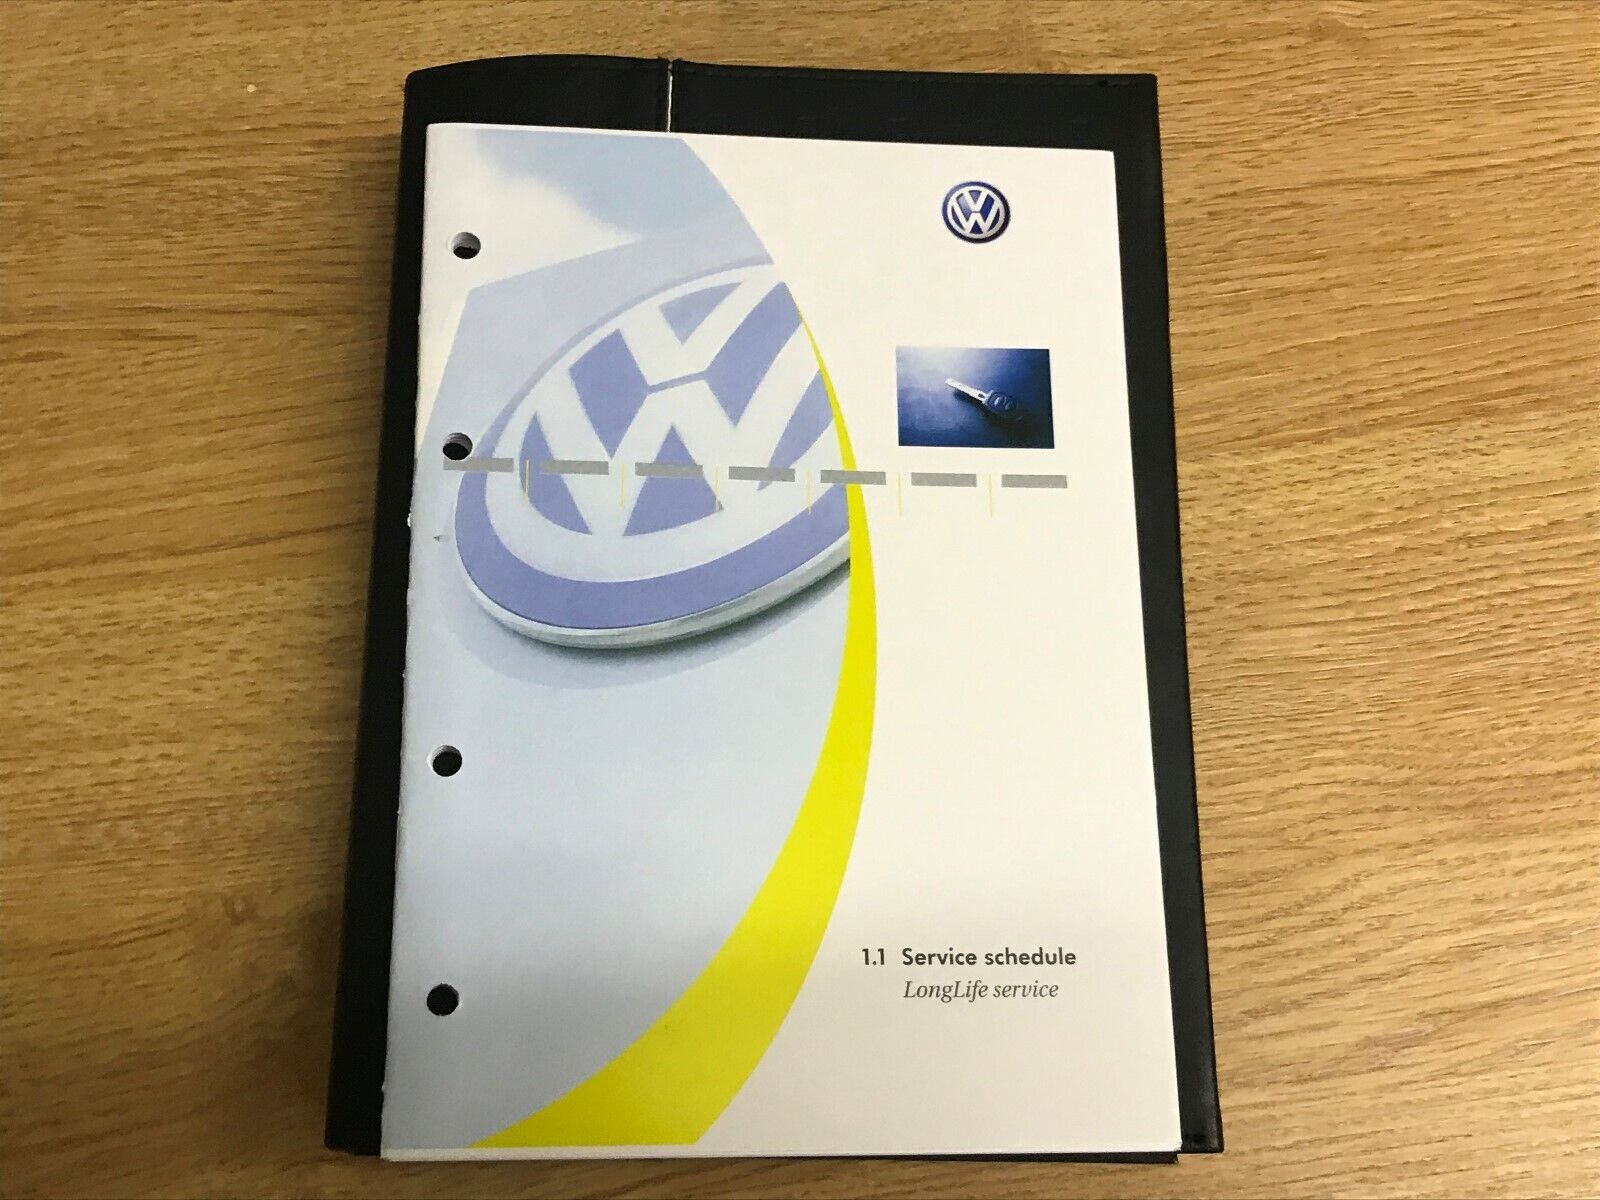 Volkswagen VW GOLF service book brand new not duplicate covers all models POLO  